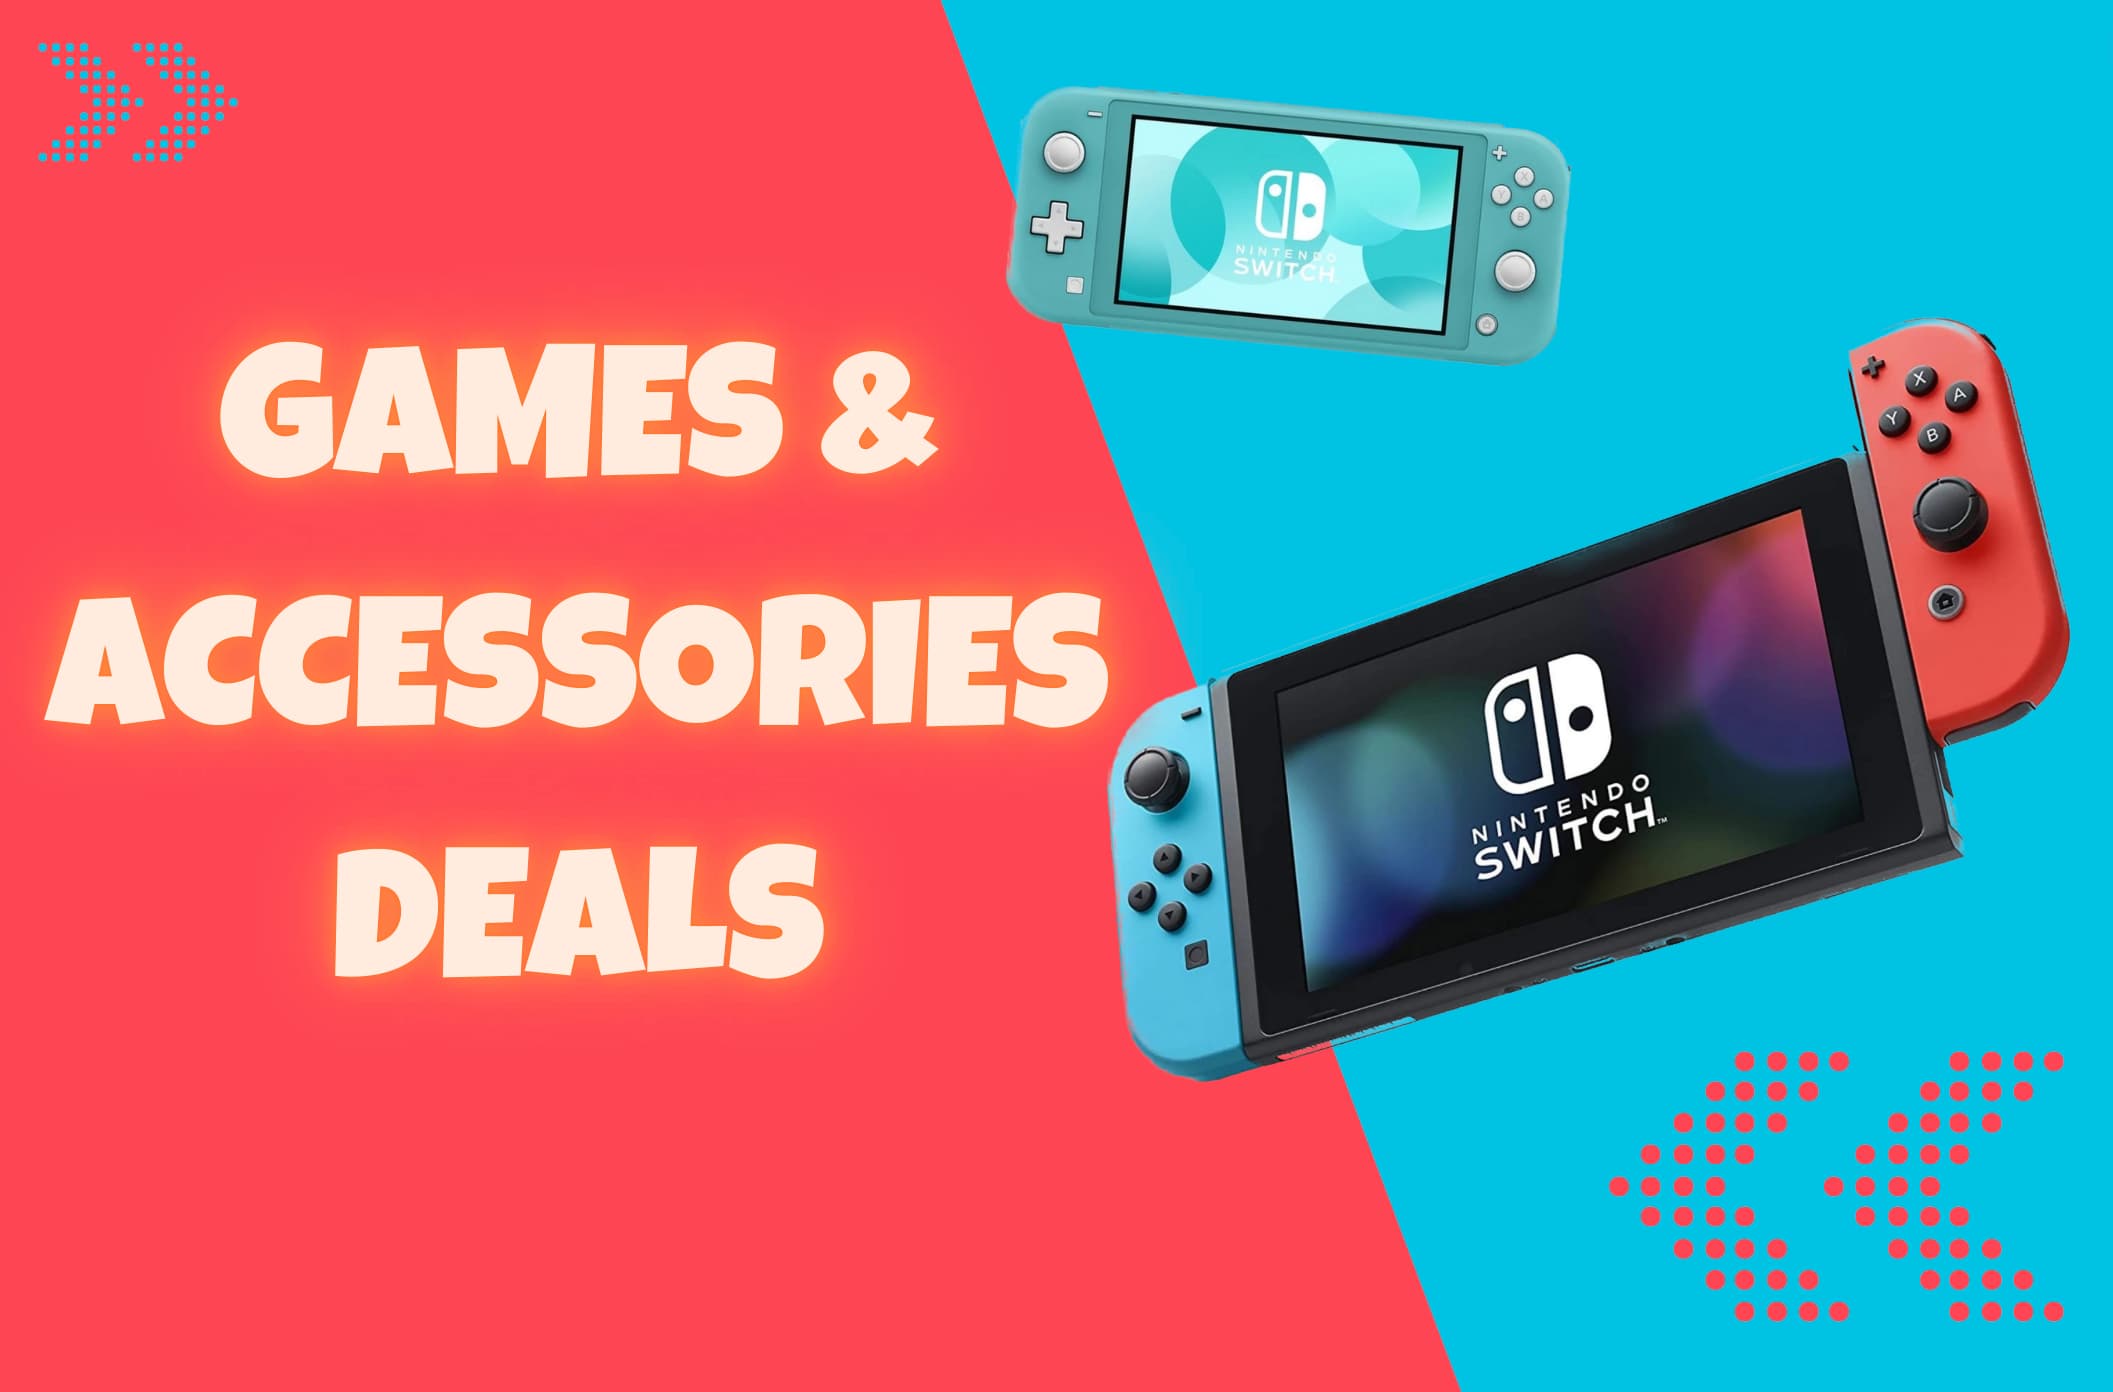 Nintendo Switch gamers should hop on these deals while they can